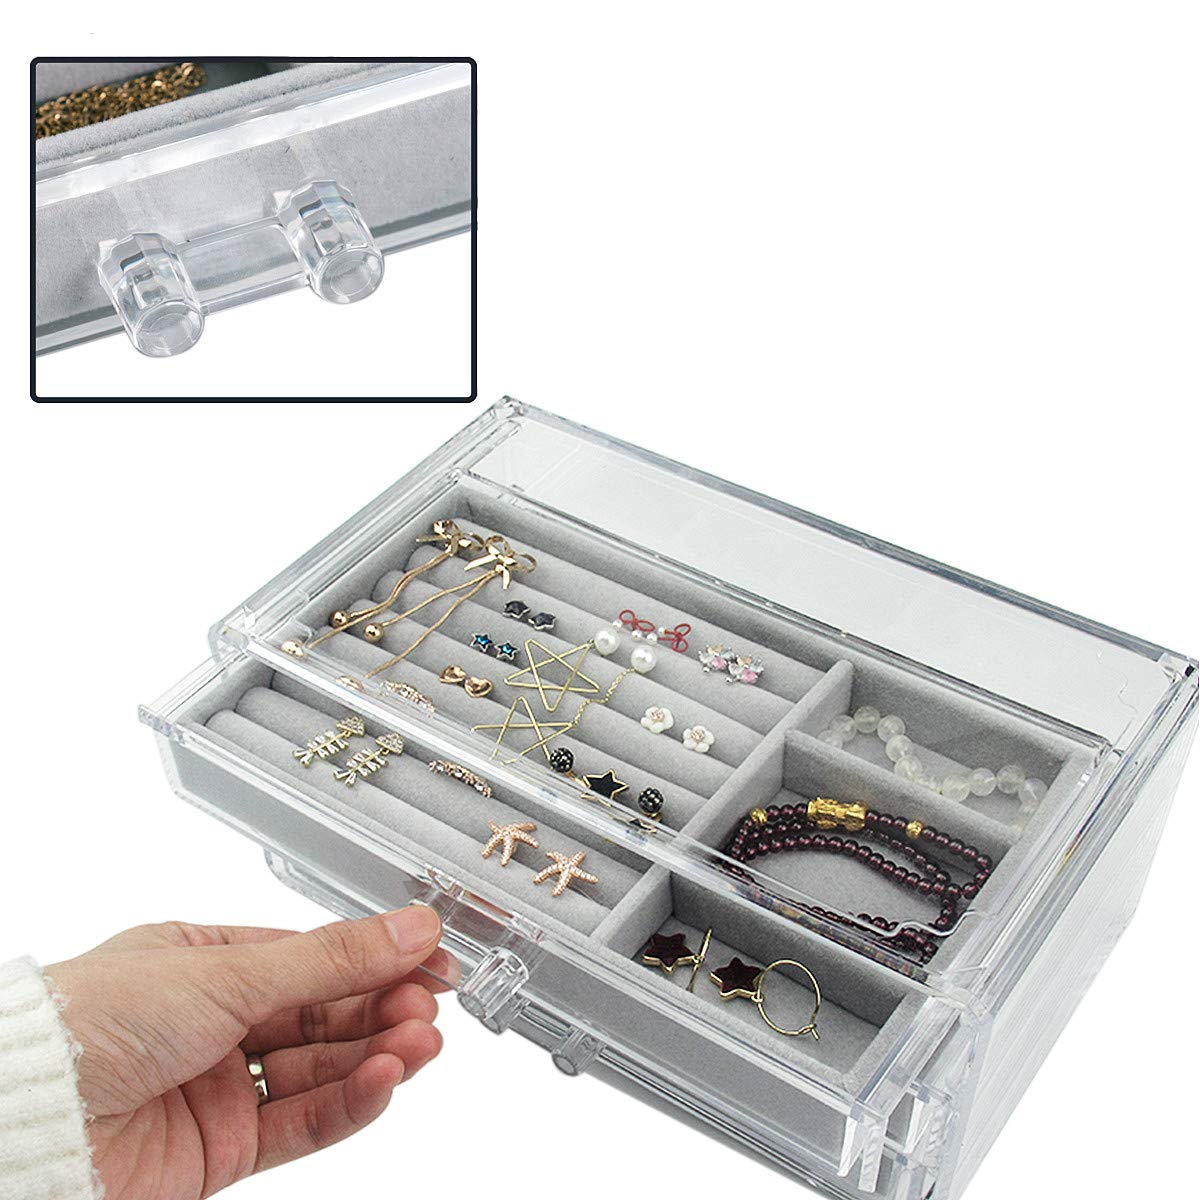 Acrylic Jewelry Box 3 Drawers, Velvet Jewellery Organizer, Earring Rings Necklaces Bracelets Display Case Gift for Women, Girls